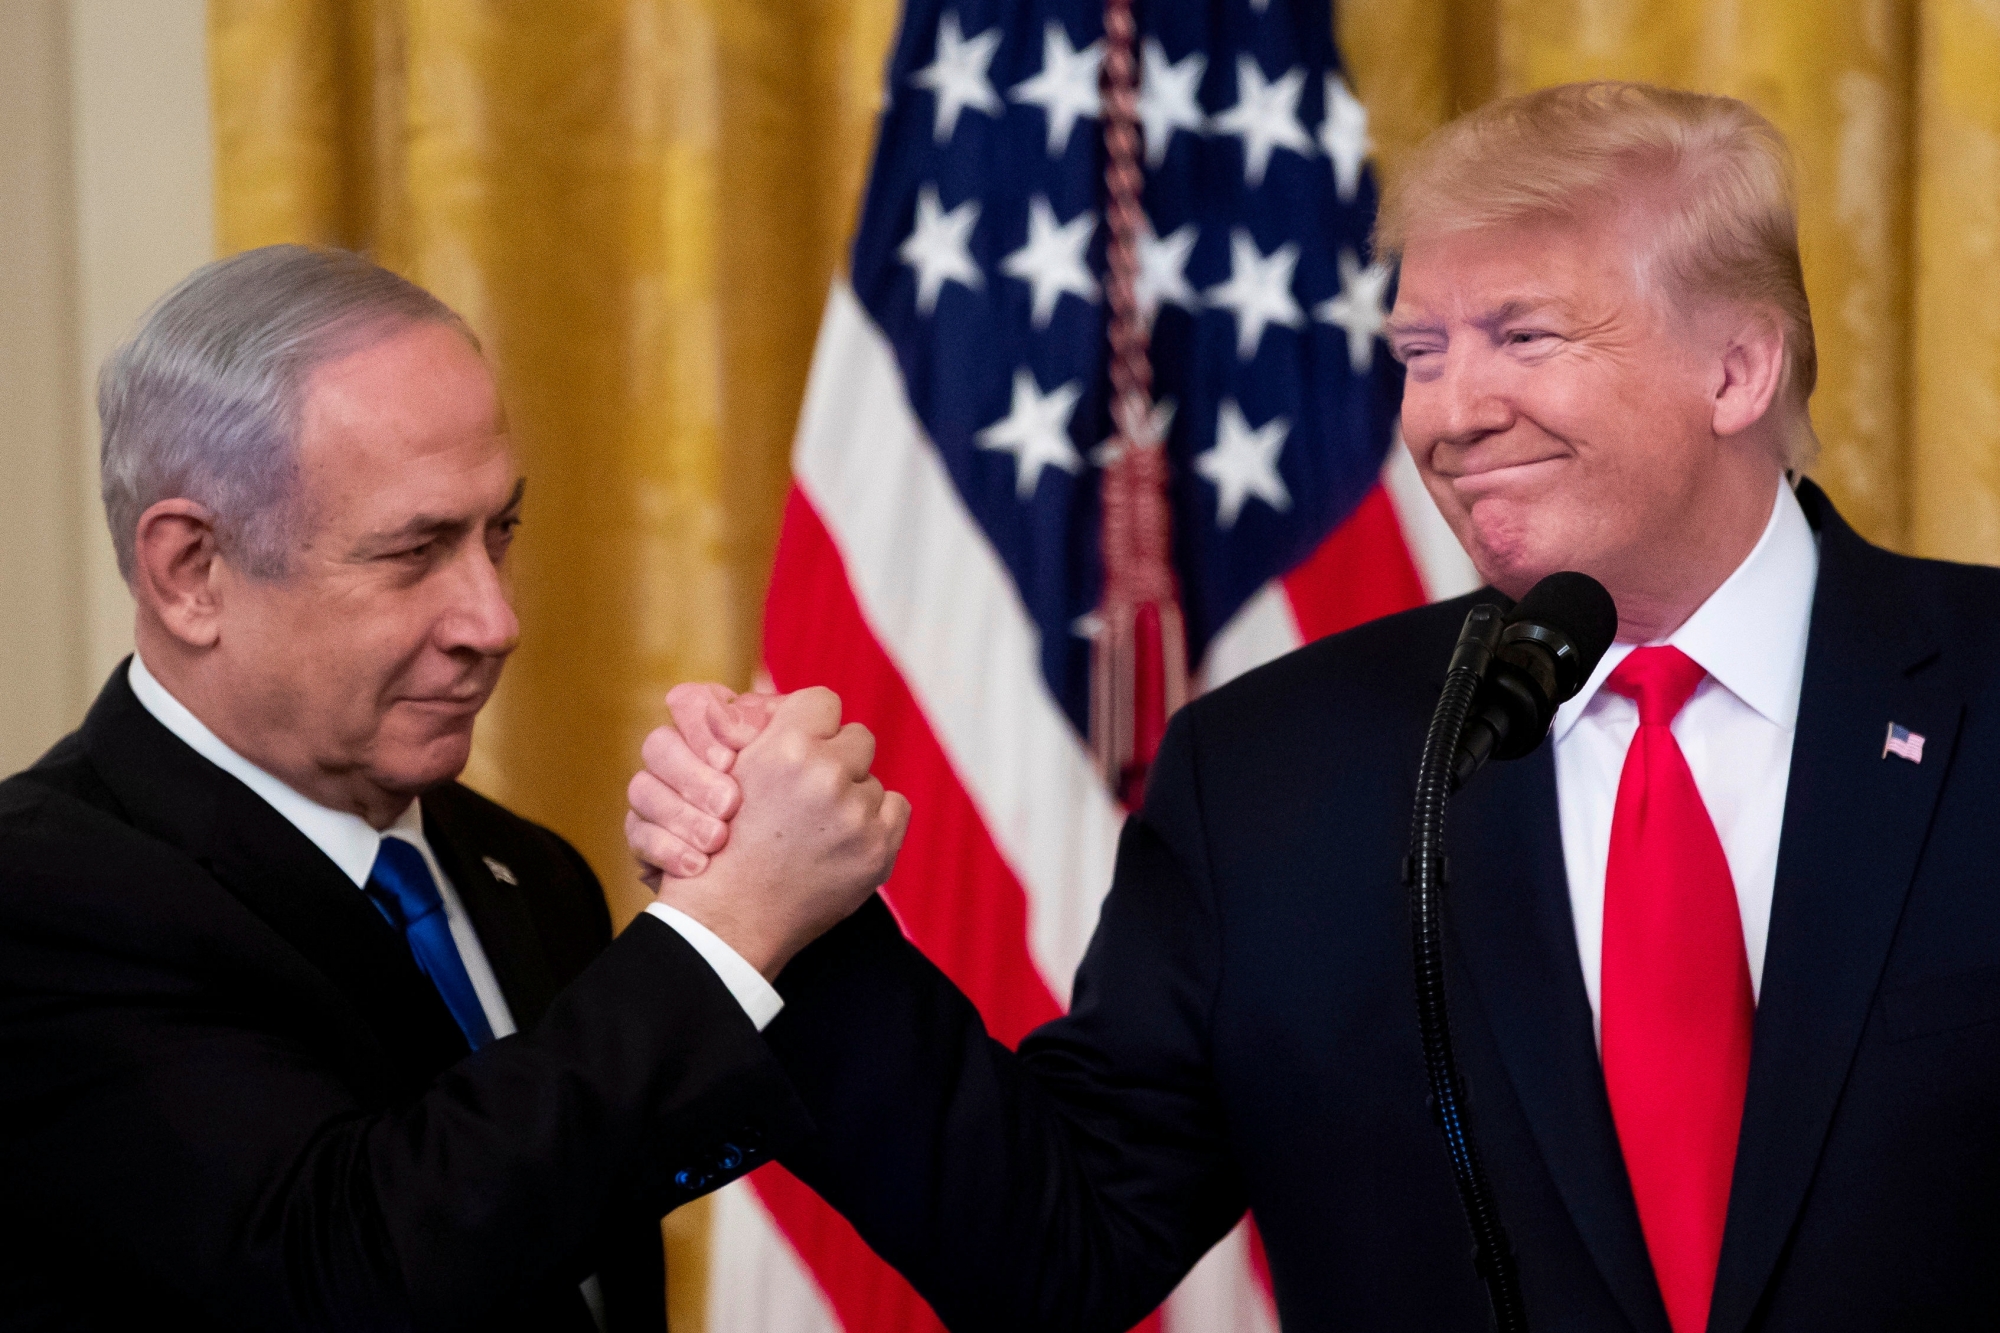 epa08173197 US President Donald J. Trump (R) shakes hands with Prime Minister of Israel Benjamin Netanyahu while unveiling his Middle East peace plan in the East Room of the White House, in Washington, DC, USA, 28 January 2020. US President Donald J. Trump's Middle East peace plan is expected to be rejected by Palestinian leaders, having withdrawn from engagement with the White House after Trump recognized Jerusalem as the capital of Israel. The proposal was announced while Netanyahu and his political rival, Benny Gantz, both visit Washington, DC.  EPA/MICHAEL REYNOLDS
ArcInfo